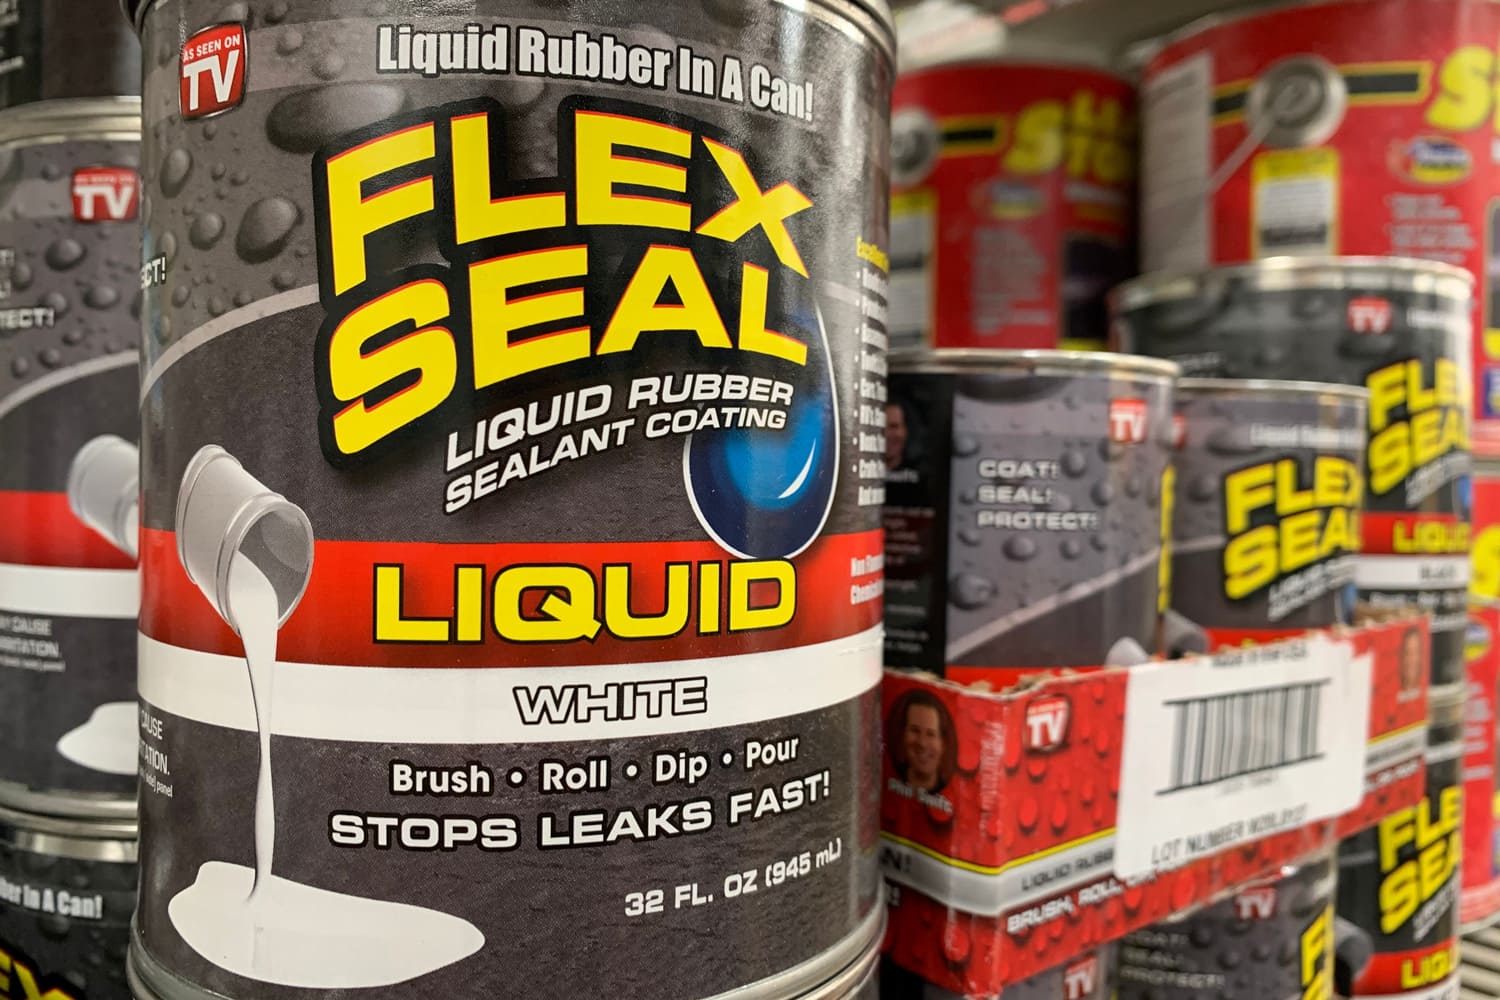 Cans of Flex Seal on a Store Shelf